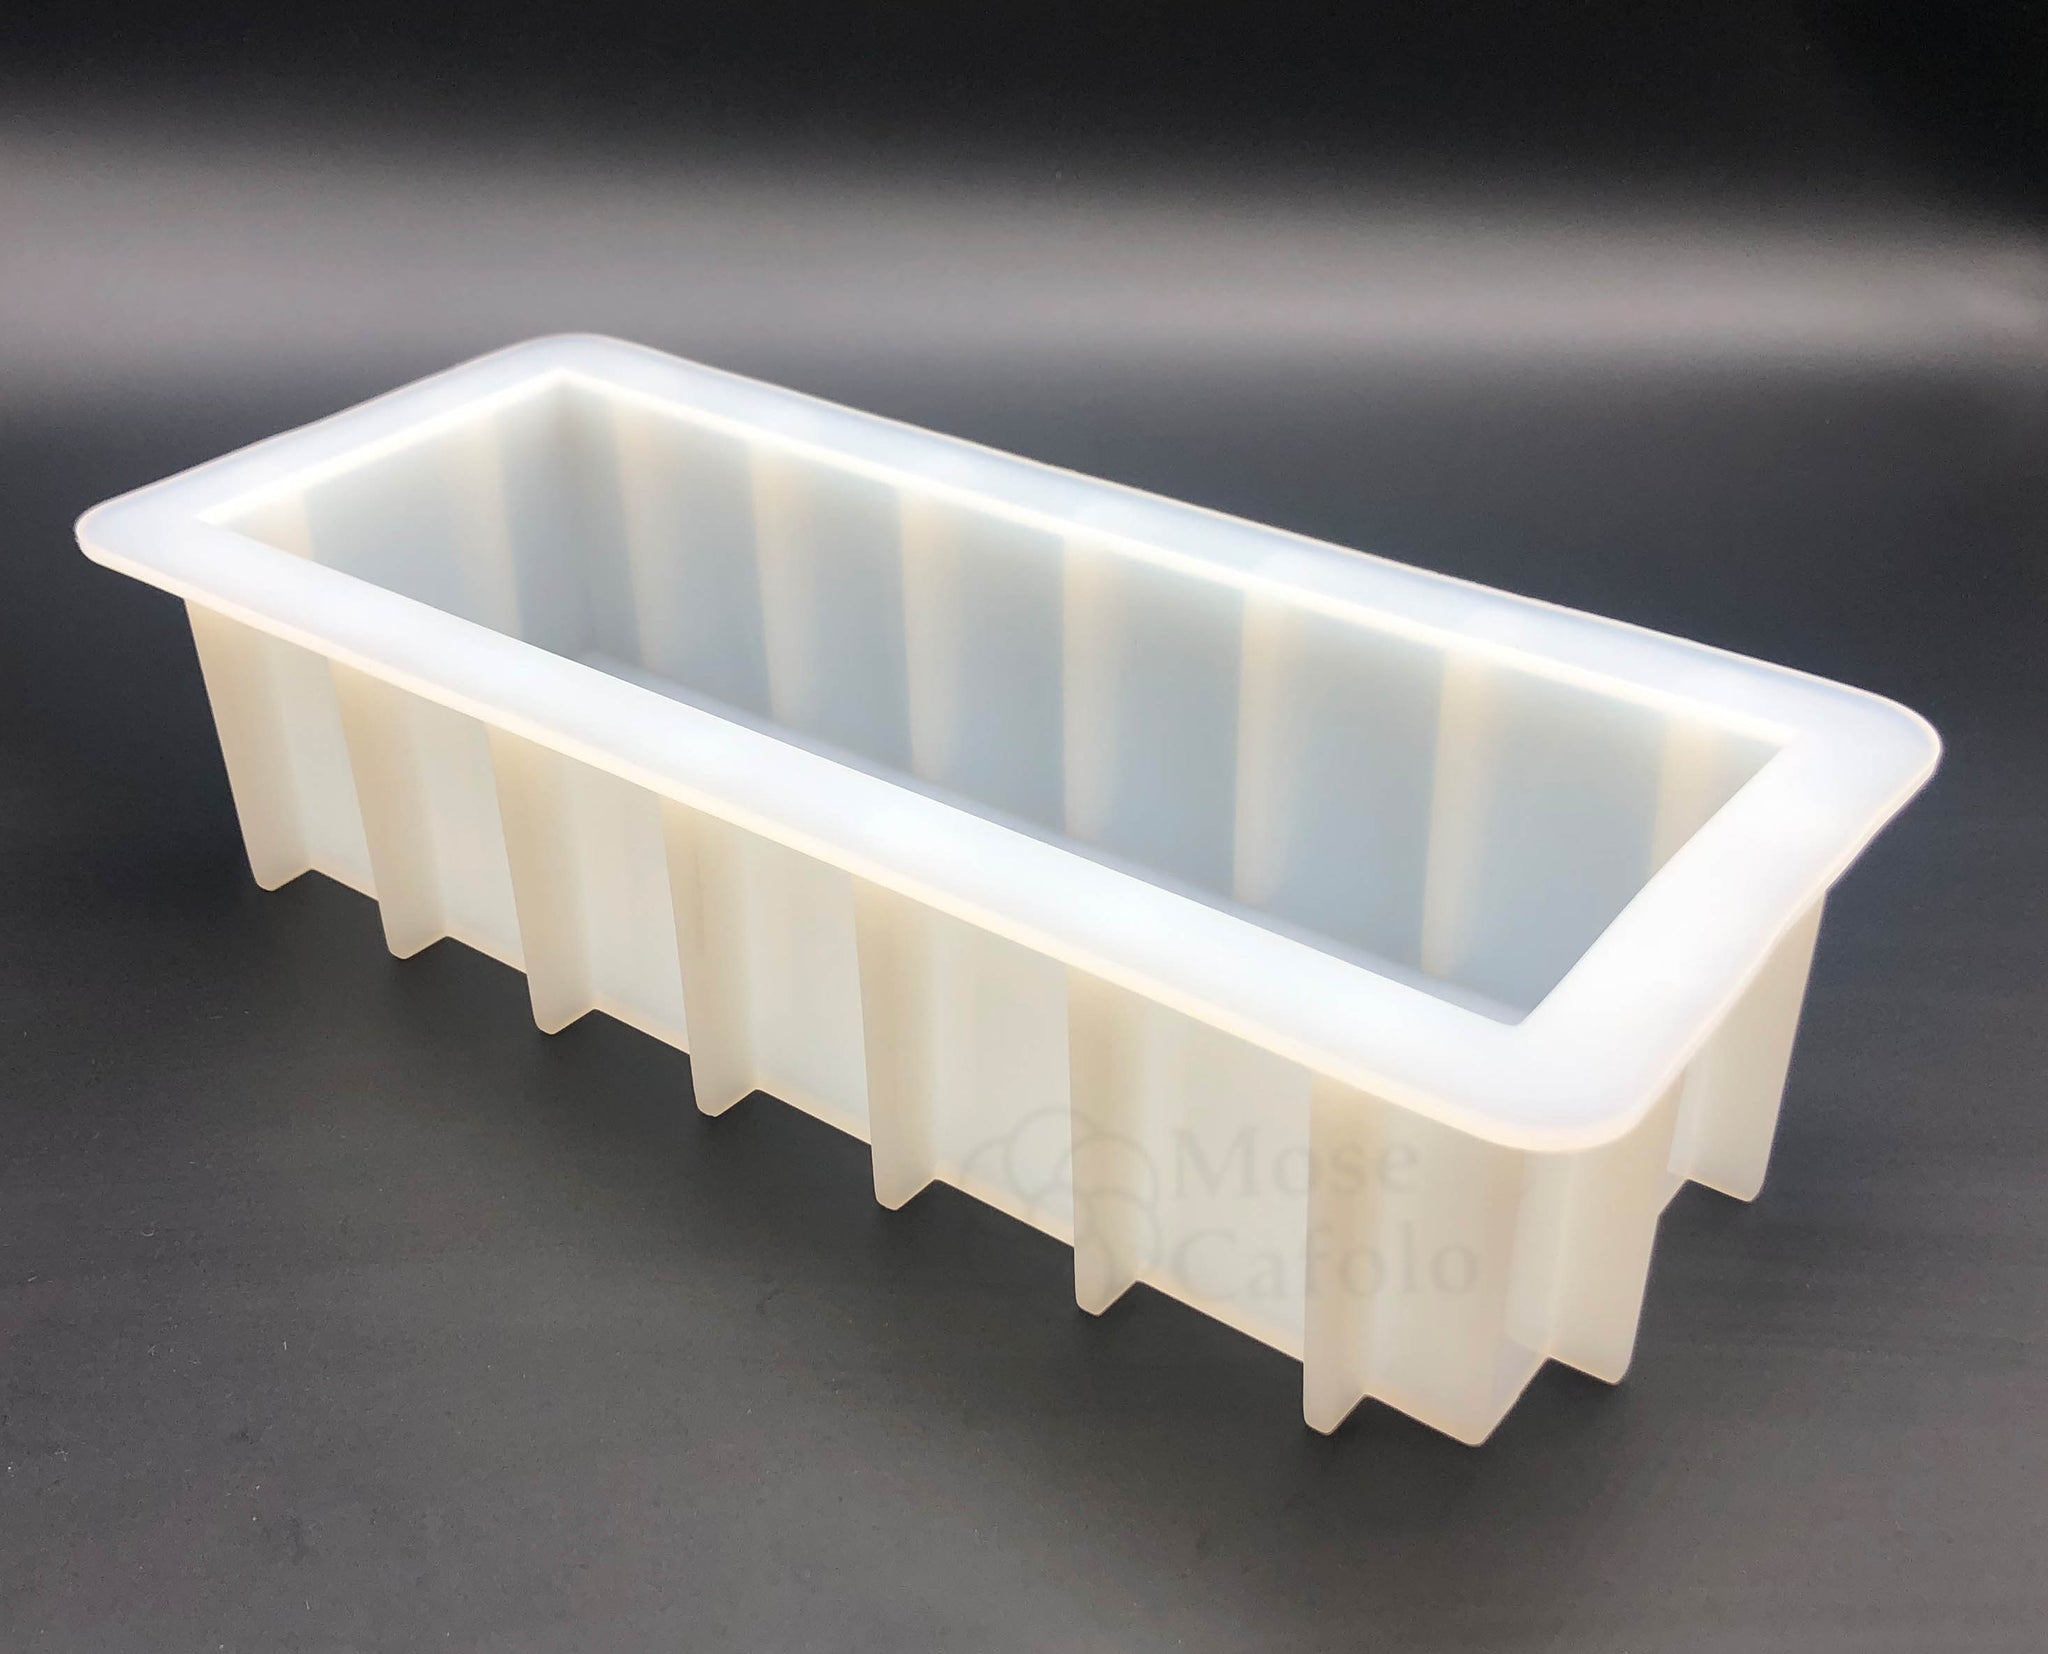 Small Silicone Loaf Mould